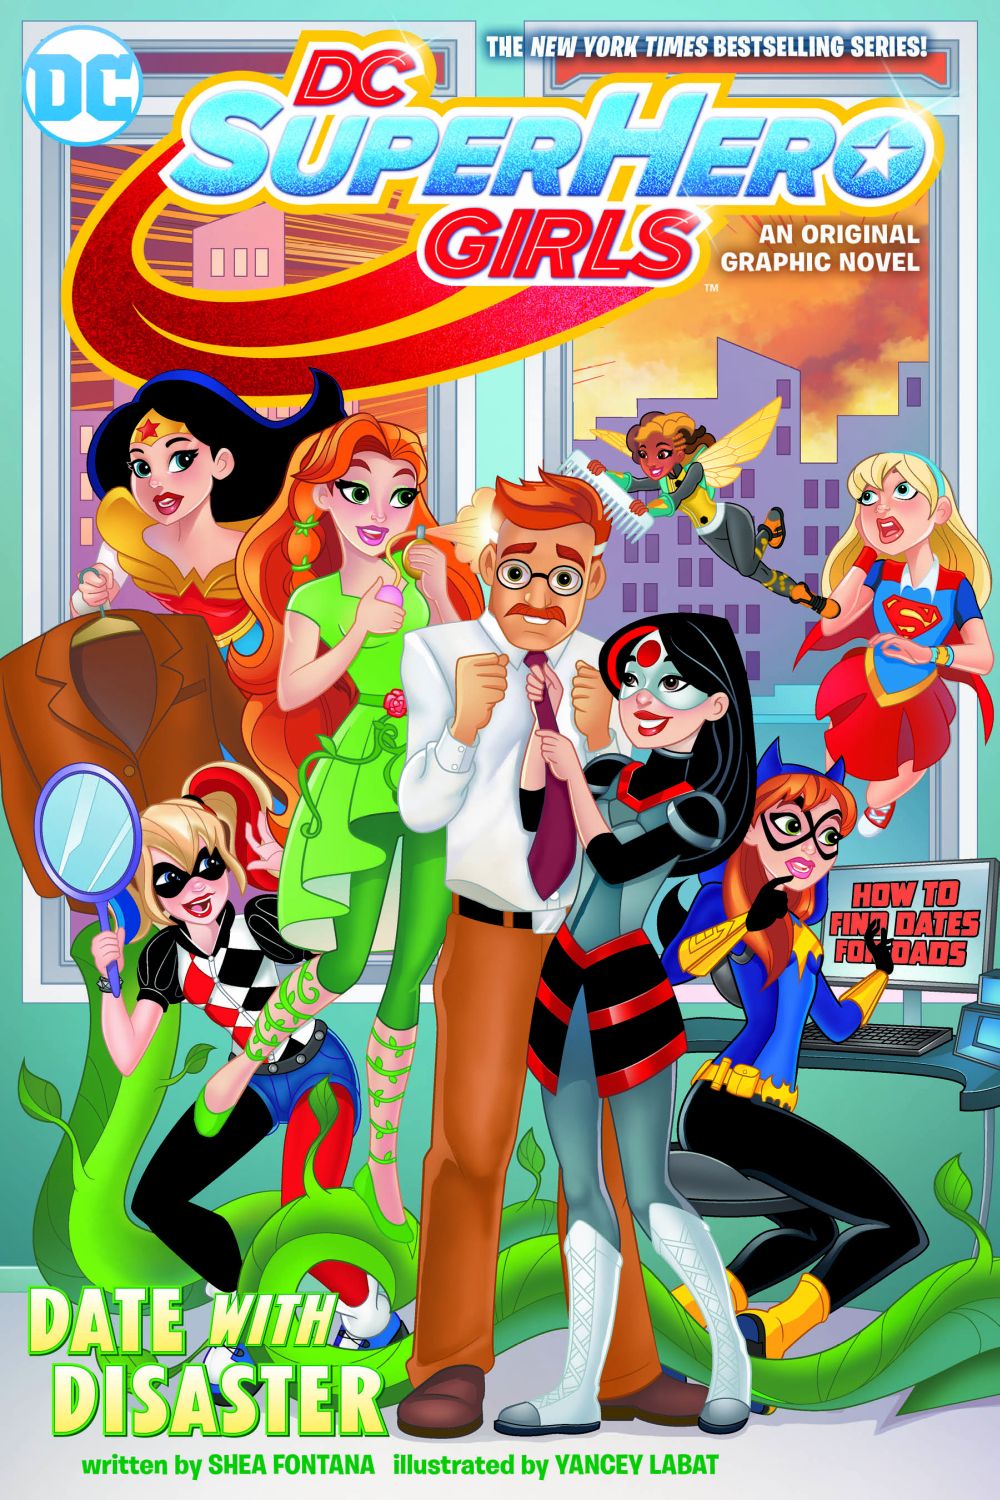 DC SUPER HERO GIRLS: DATE WITH DISASTER TP